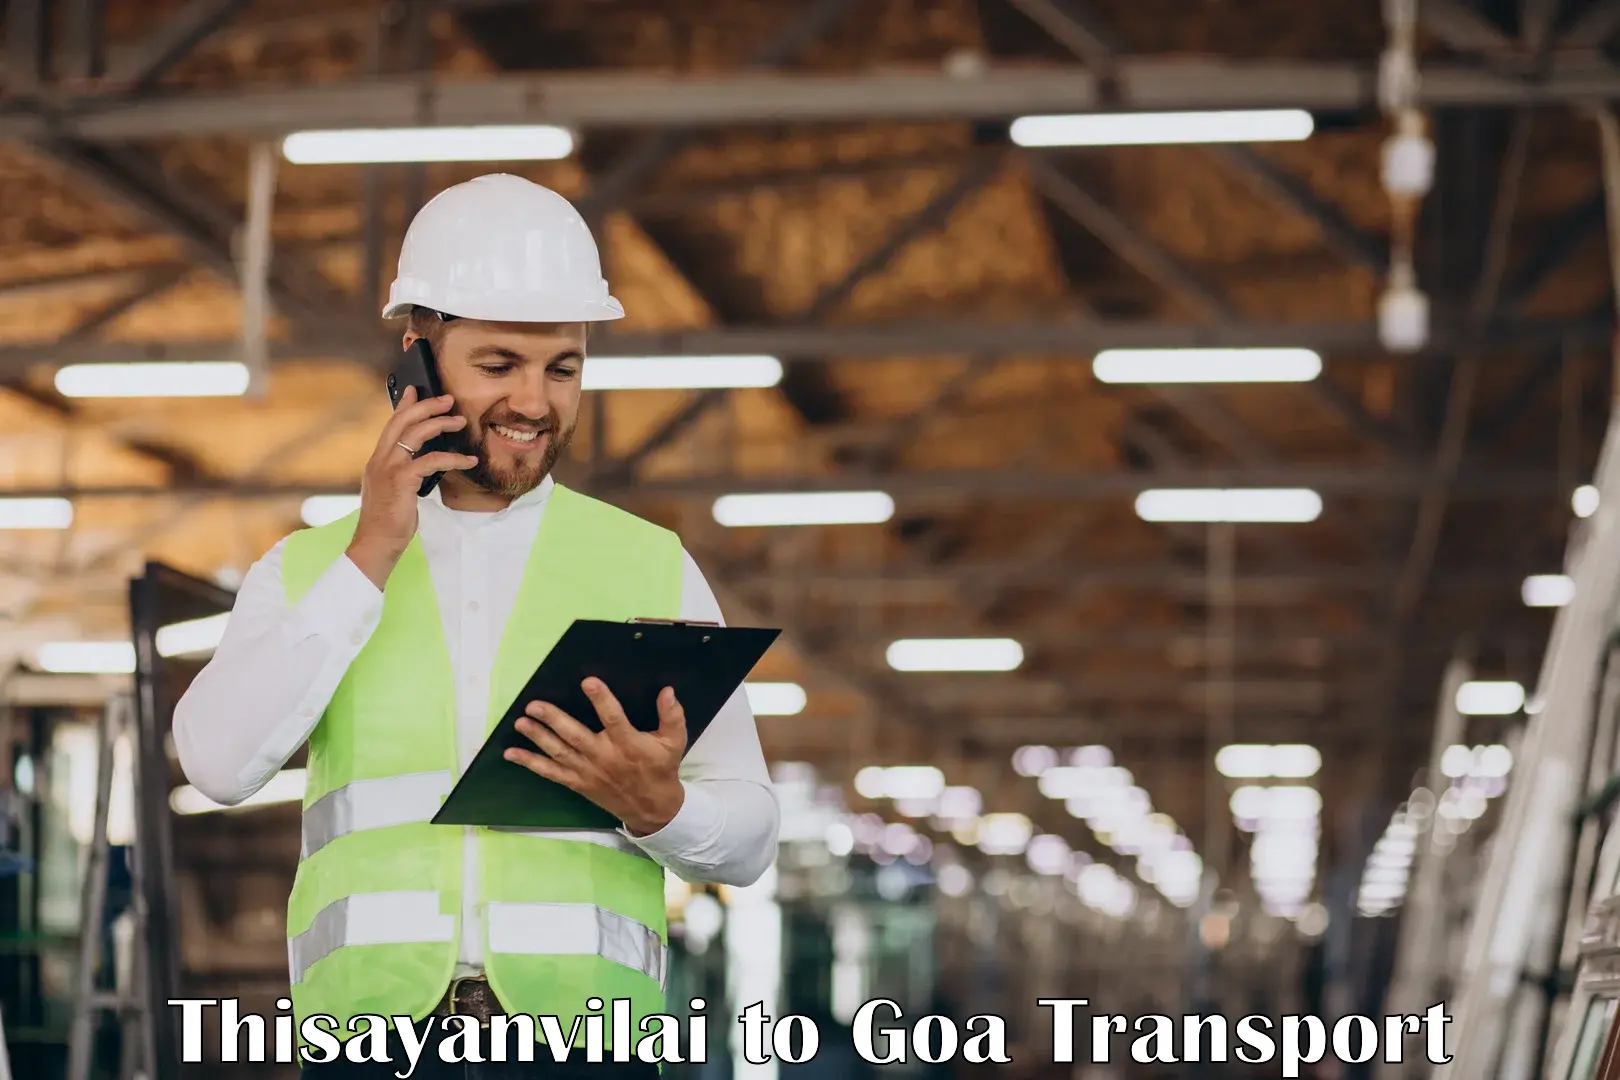 Delivery service Thisayanvilai to South Goa